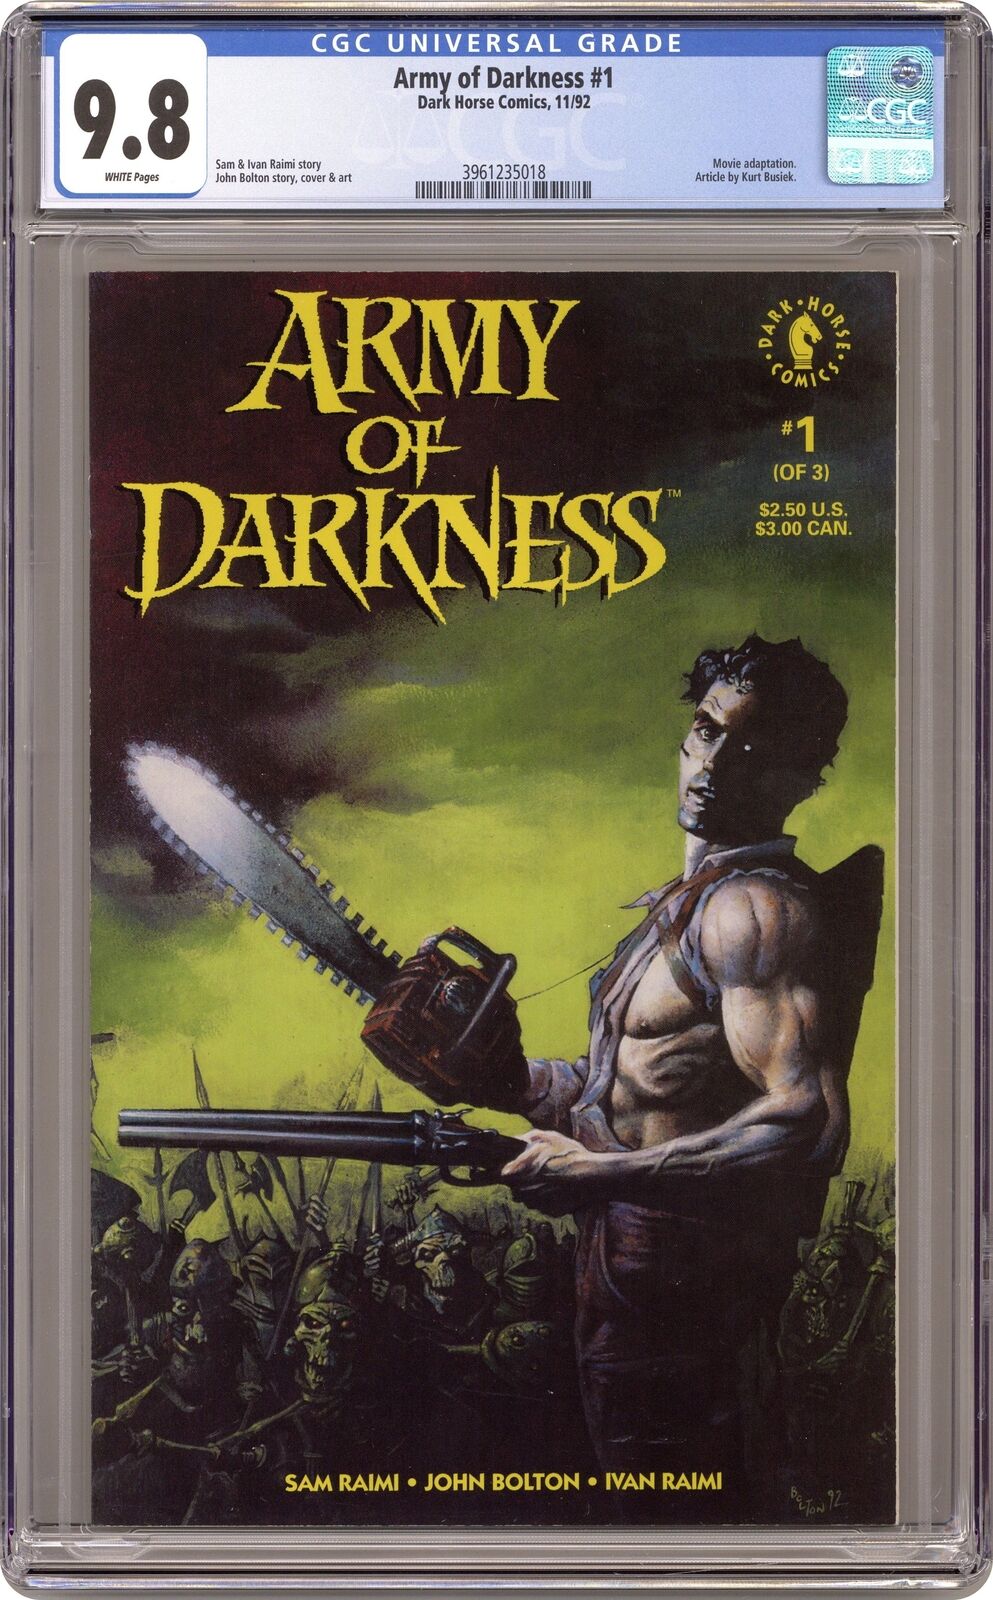 Army of Darkness #1 CGC 9.8 1992 3961235018